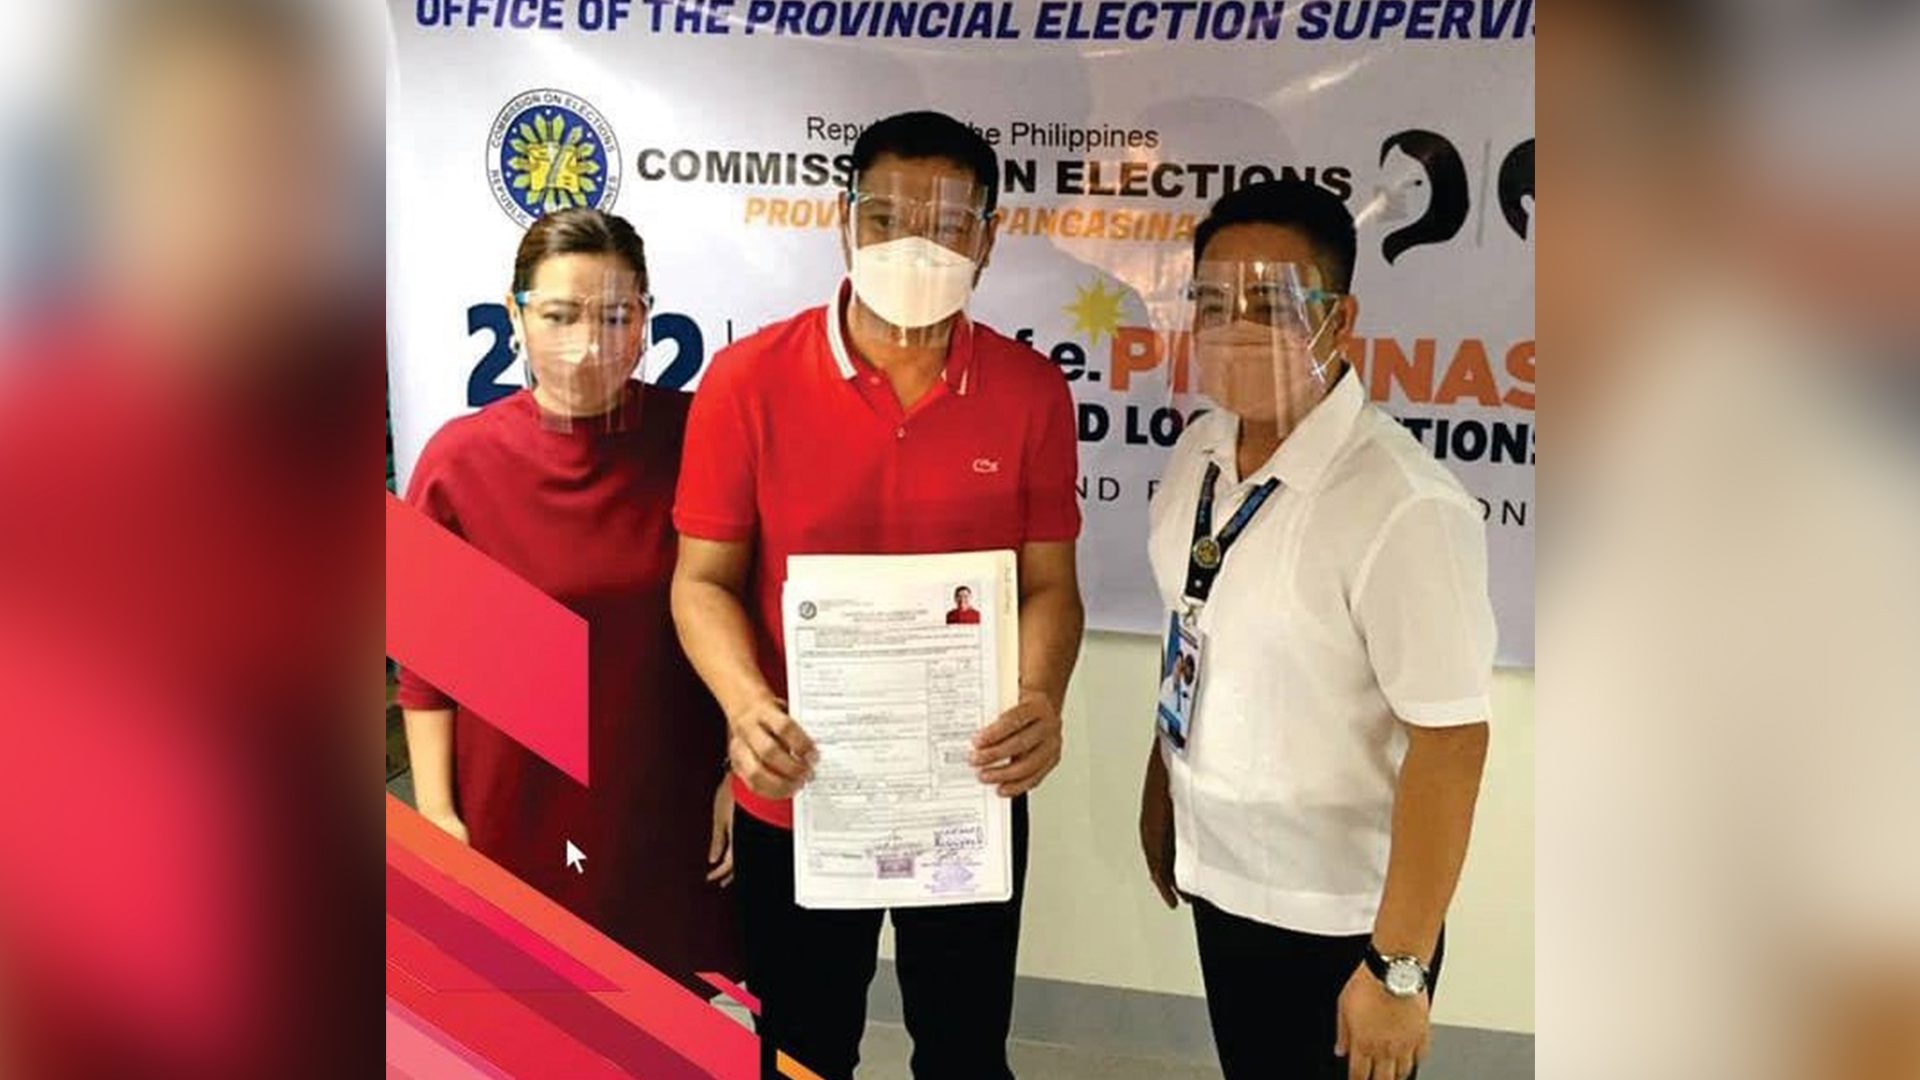 Pangasinan governor shows up on tarps endorsing ‘top five’ presidential bets